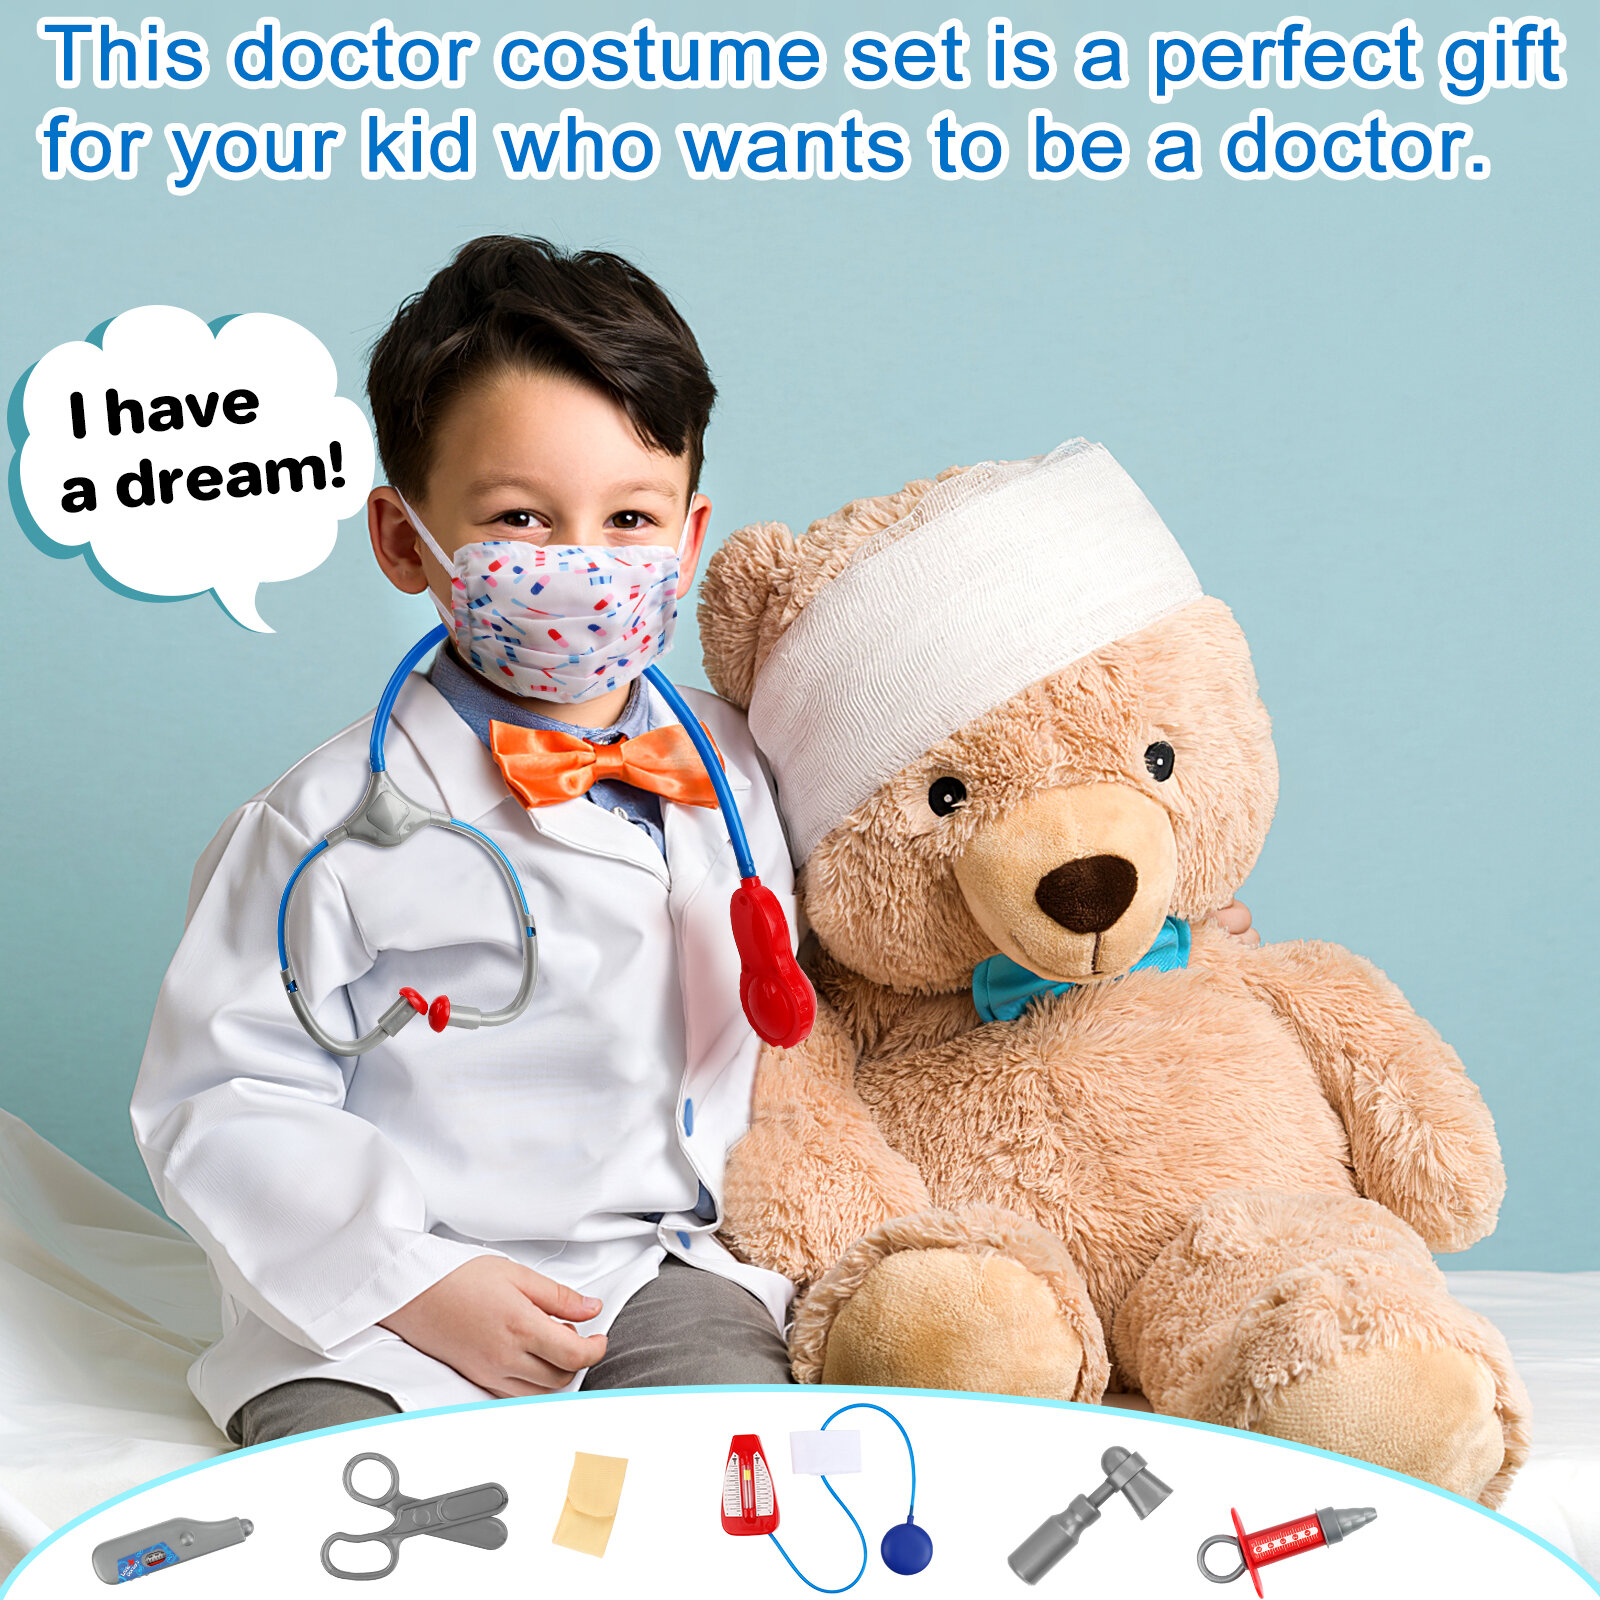 deAO Pretend Doctor Role Play Fancy Dress Up Costume Set for Kids Medical Play Educational Toy for Kids Gifts for Xmas Birthday  Costume-PC-WDOC